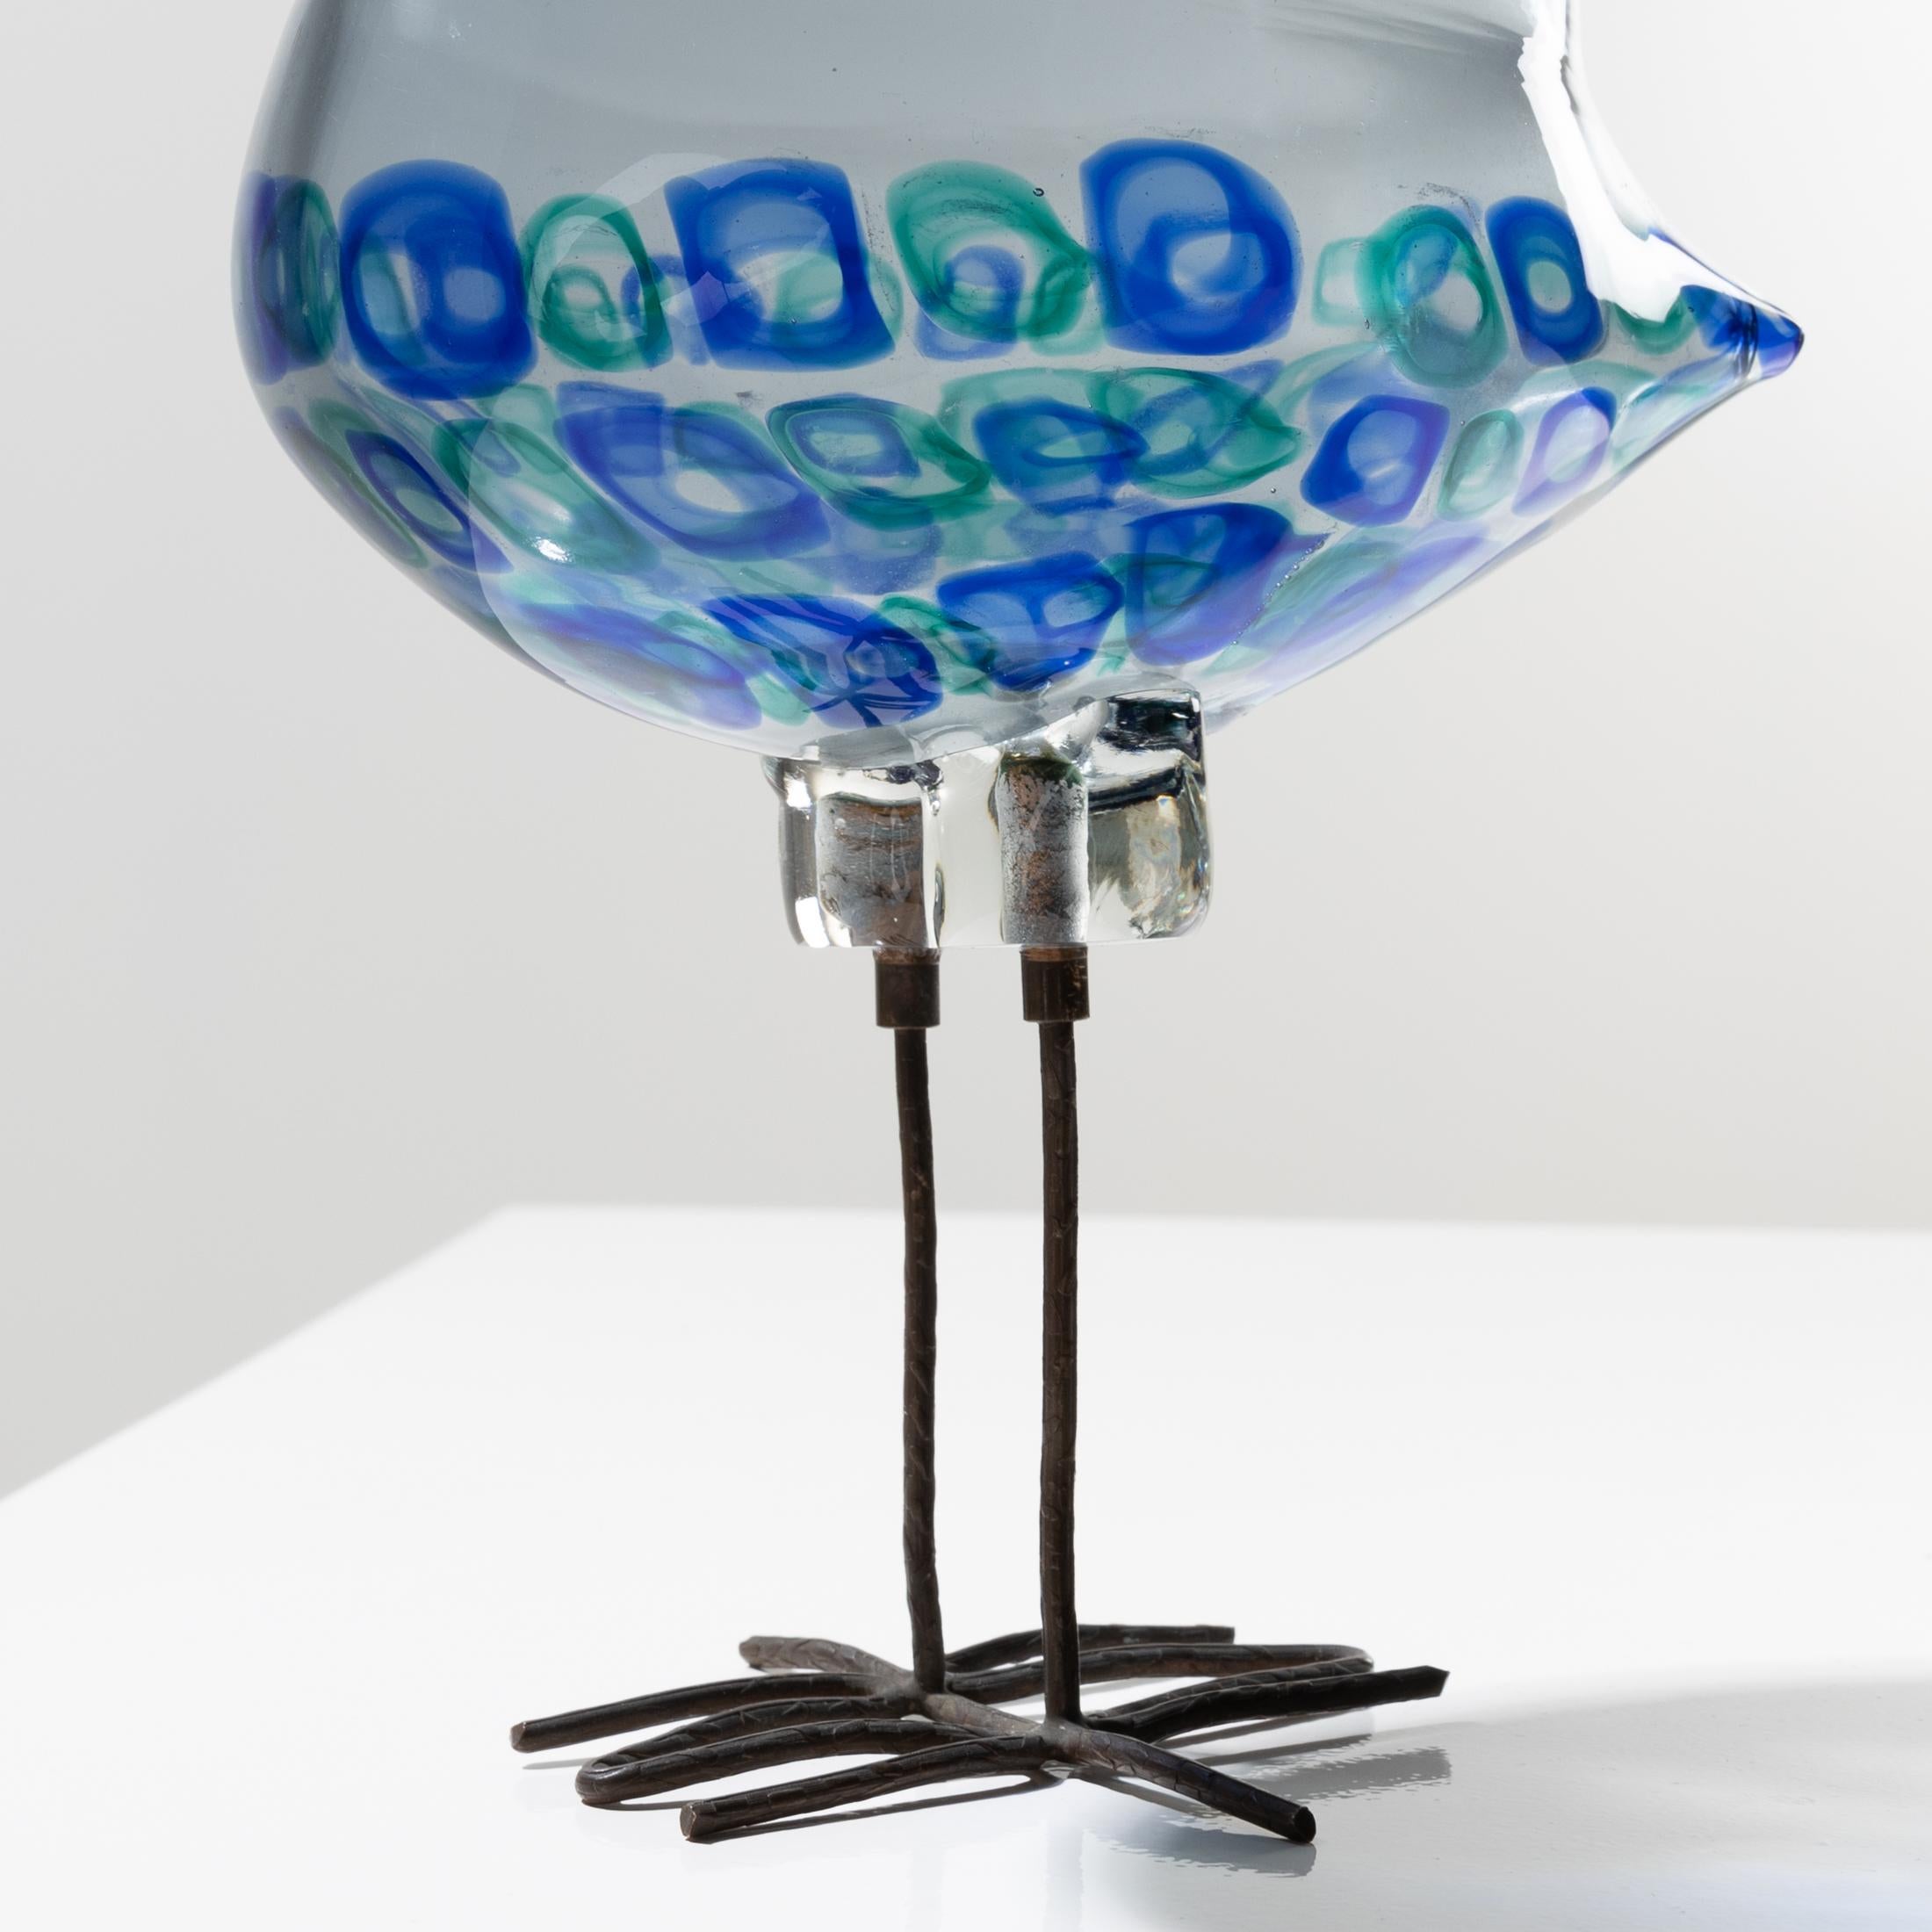 20th Century Sculpture of a Bird in Blown Glass with Murrine Arrangement by Alessandro Pianon